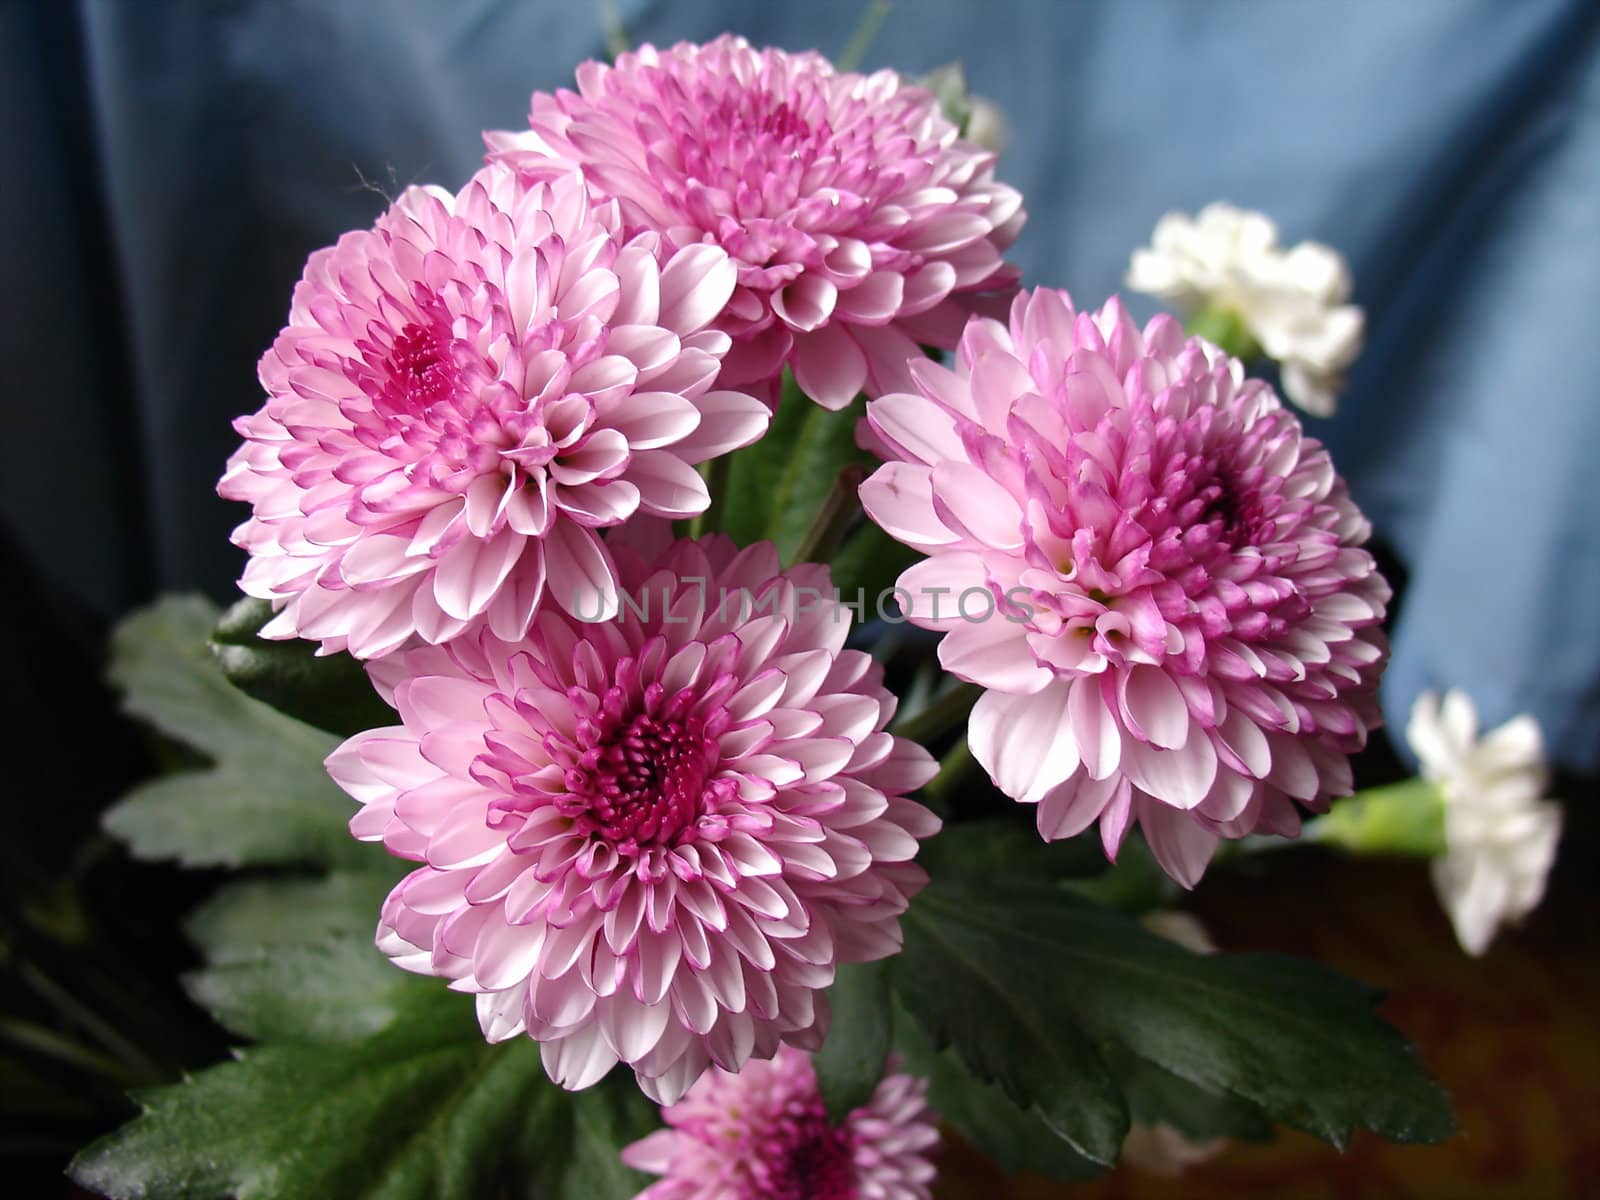 Small pink chrysanthemums on a blue background